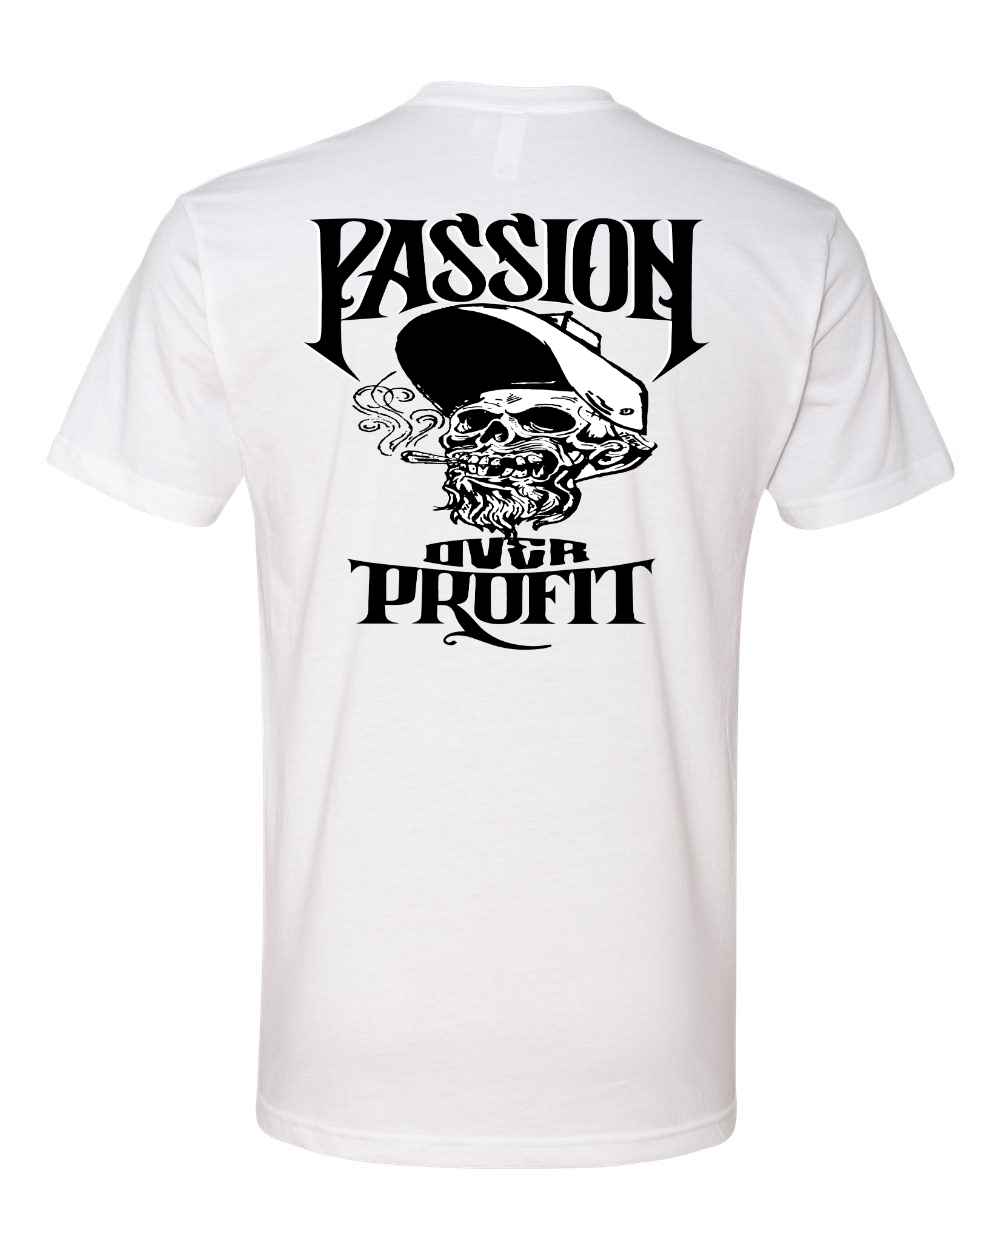 Tools of The Trade - Passion Over Profit - Black Print